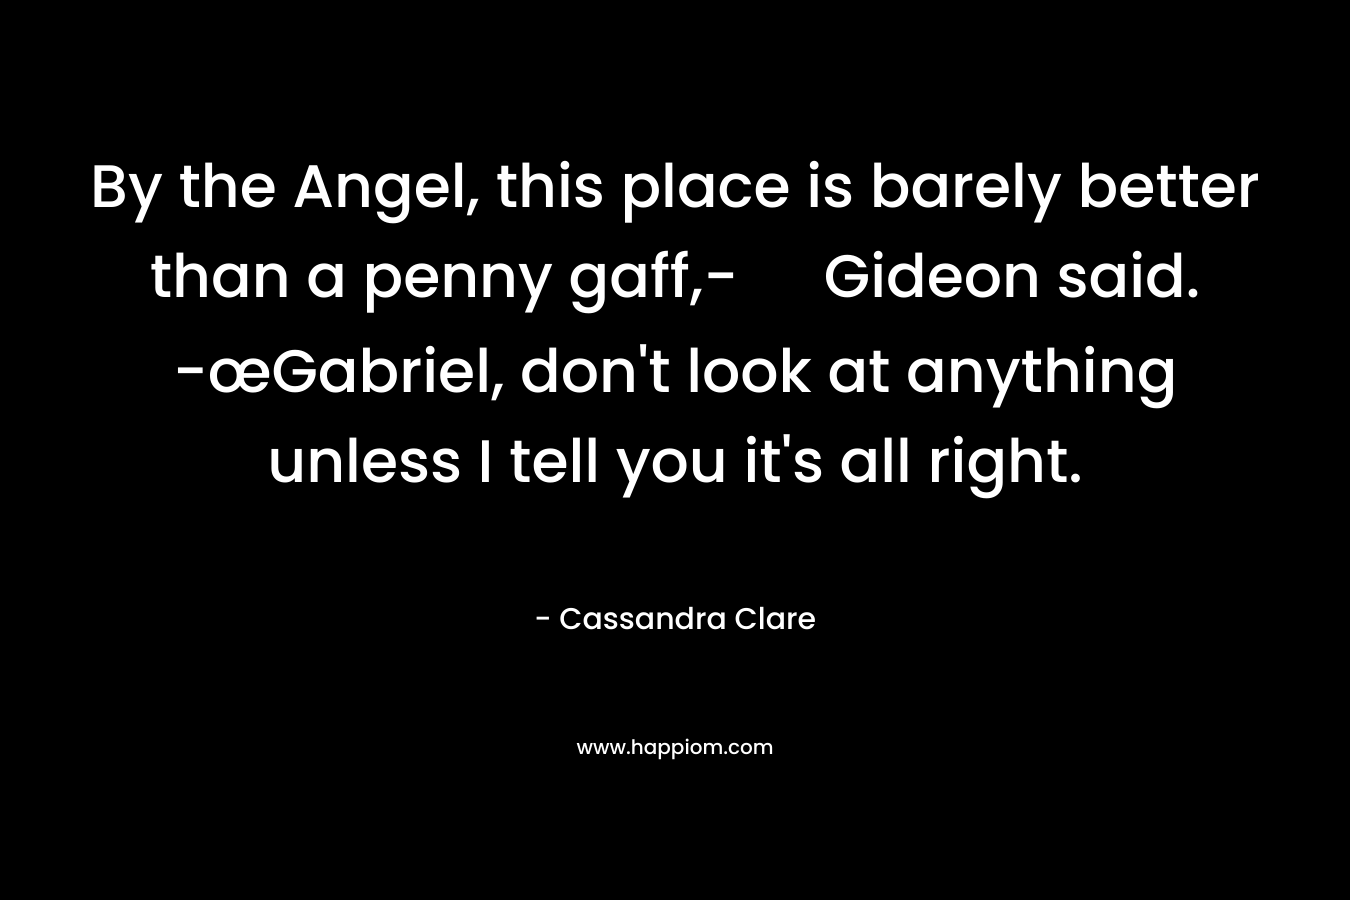 By the Angel, this place is barely better than a penny gaff,- Gideon said. -œGabriel, don’t look at anything unless I tell you it’s all right. – Cassandra Clare